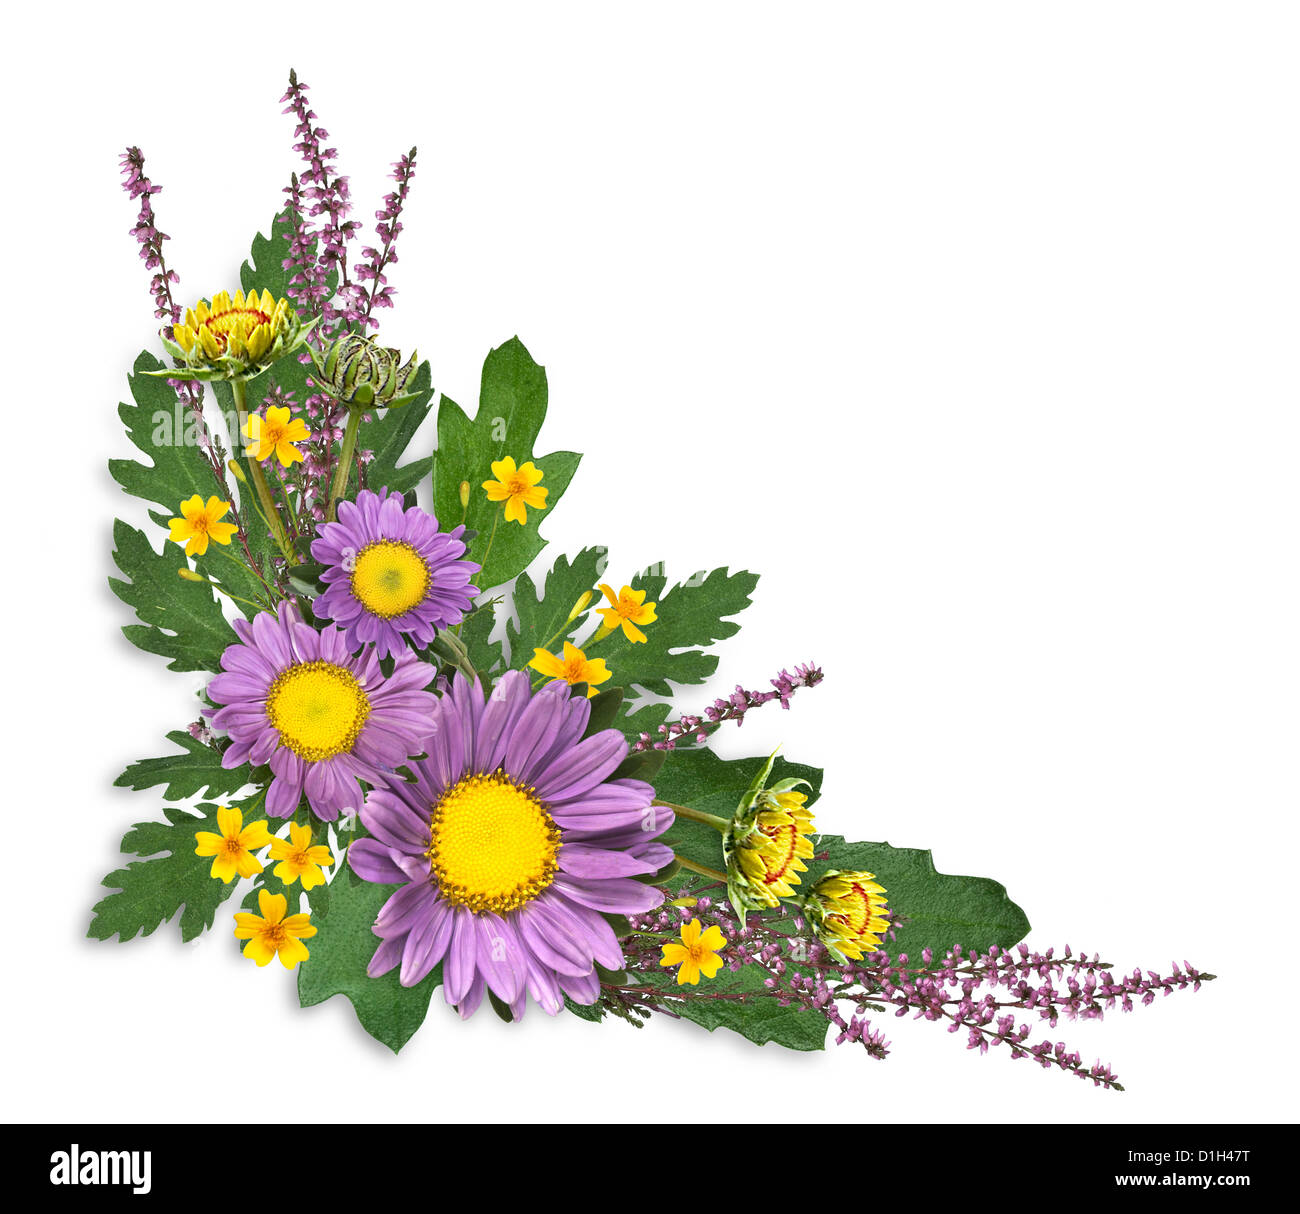 https://c8.alamy.com/comp/D1H47T/frame-made-of-flowers-cutout-on-white-background-D1H47T.jpg